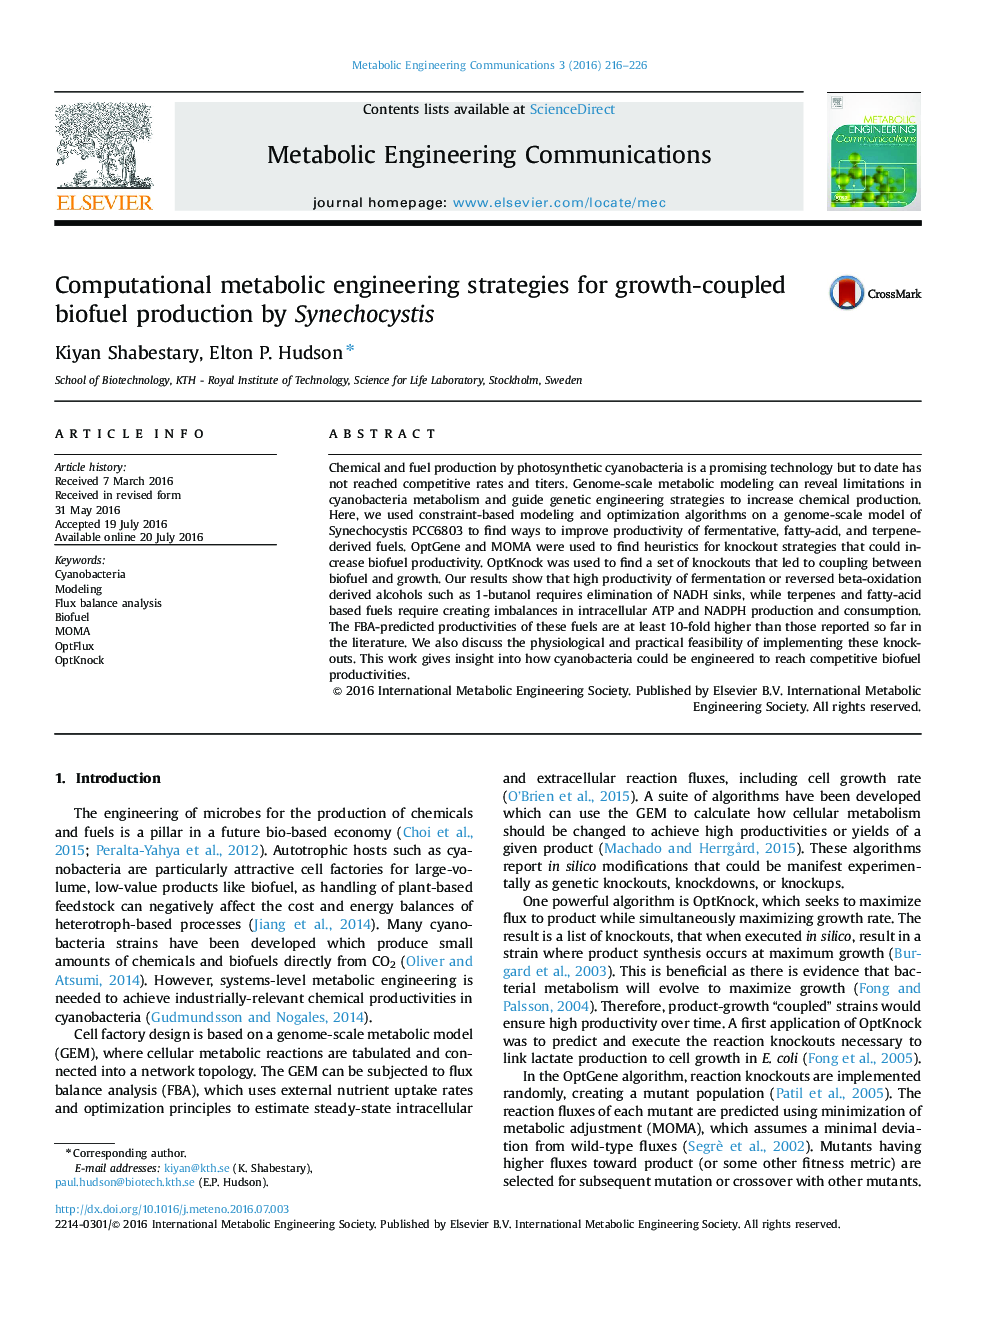 Computational metabolic engineering strategies for growth-coupled biofuel production by Synechocystis